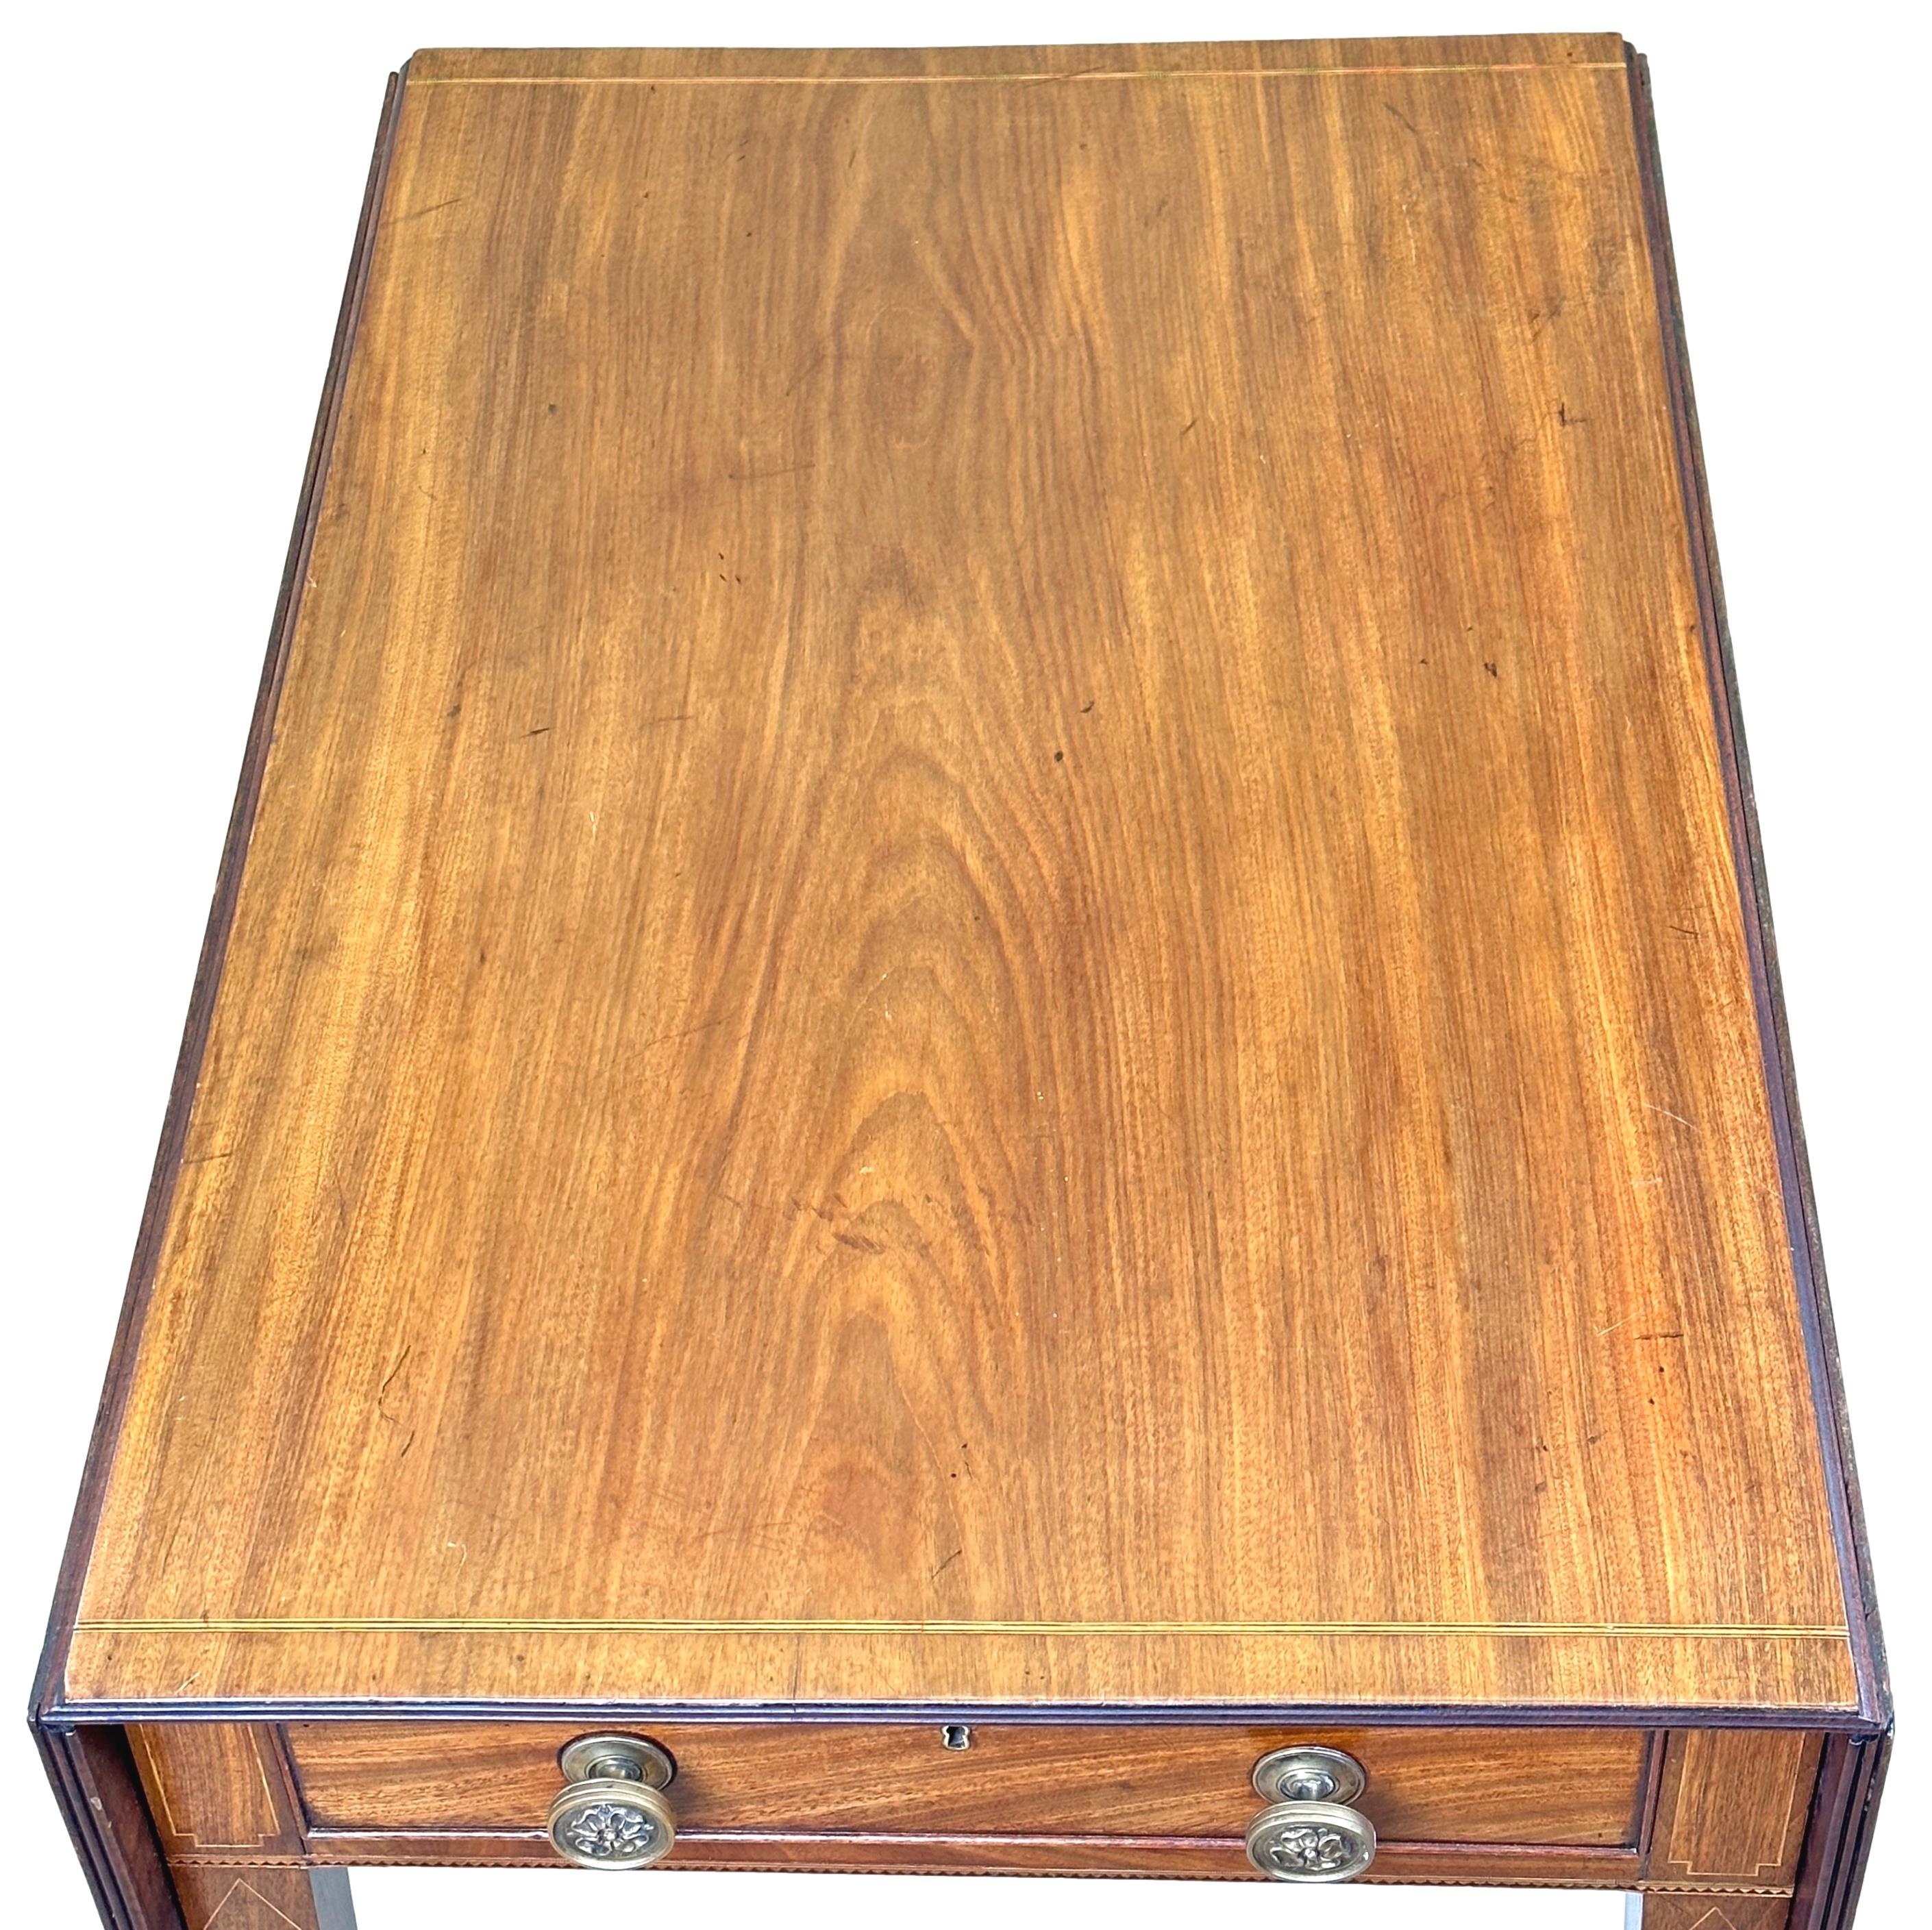 A very good quality late 18th century, Georgian Sheraton period, mahogany Pembroke table, having well figured two flap top with inlaid strung decoration, over one frieze drawer, opposed by false drawer to reverse, raised on elegant square tapered